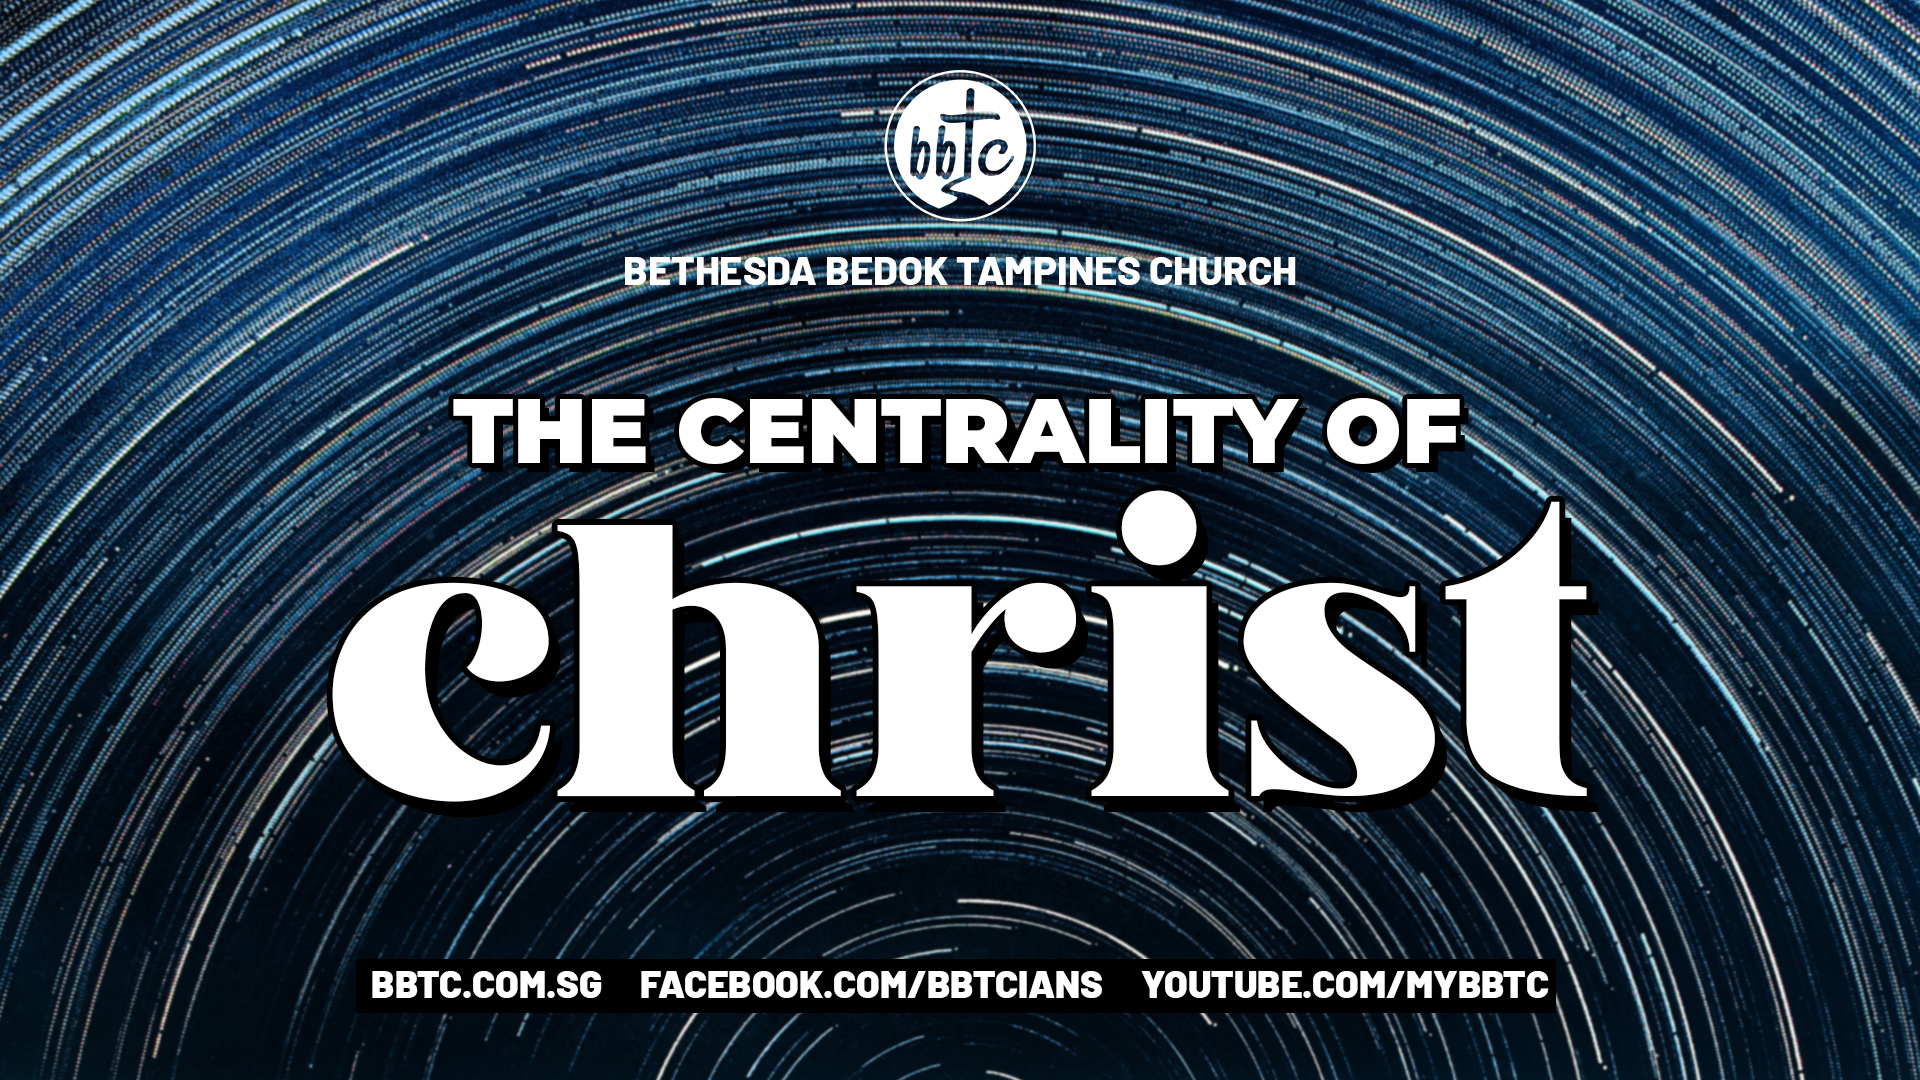 The Centrality of Christ